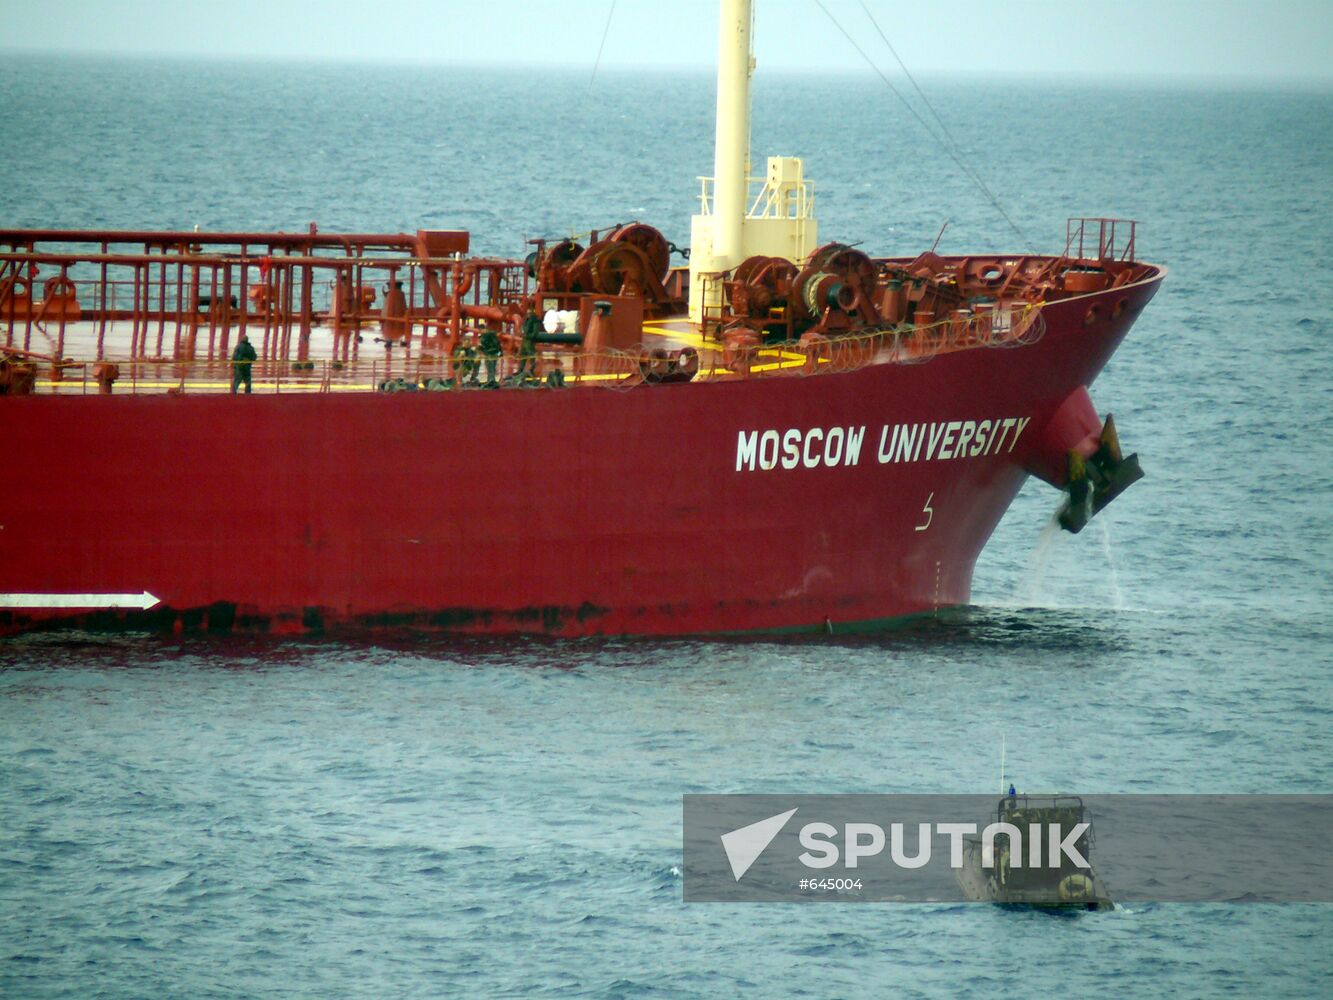 Assault operation to free captured the Moscow University tanker